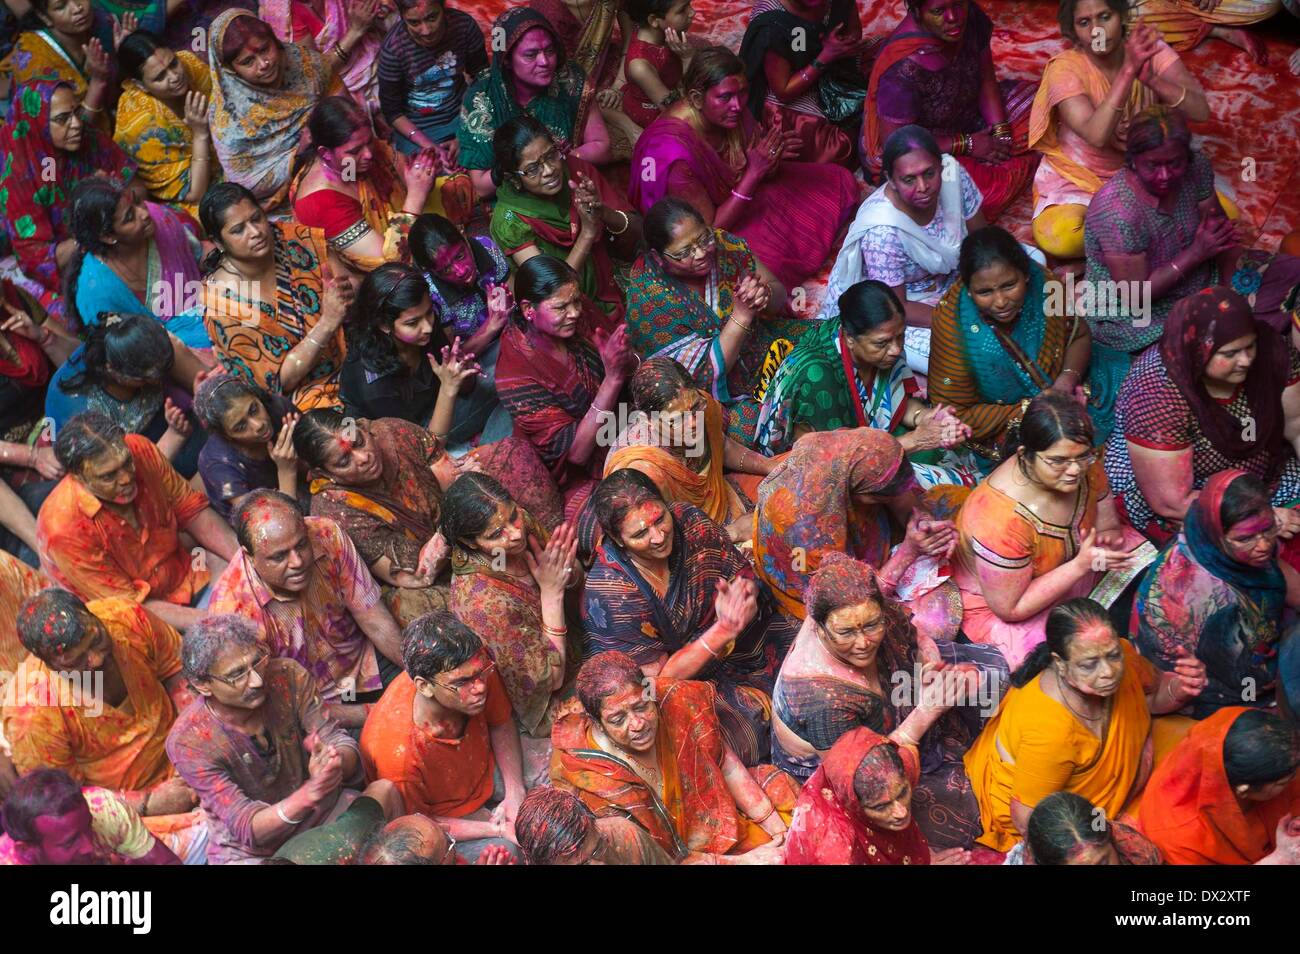 Calcutta. 17th Mar, 2014. Indian devotees celebrate the Holi festival, also known as festival of colors, at a temple in Calcutta, capital of eastern Indian state West Bengal, March, 17, 2014. The Holi festival is a popular Hindu spring festival observed in India at the end of winter season on the last full moon day of the lunar month. Credit:  Tumpa Mondal/Xinhua/Alamy Live News Stock Photo